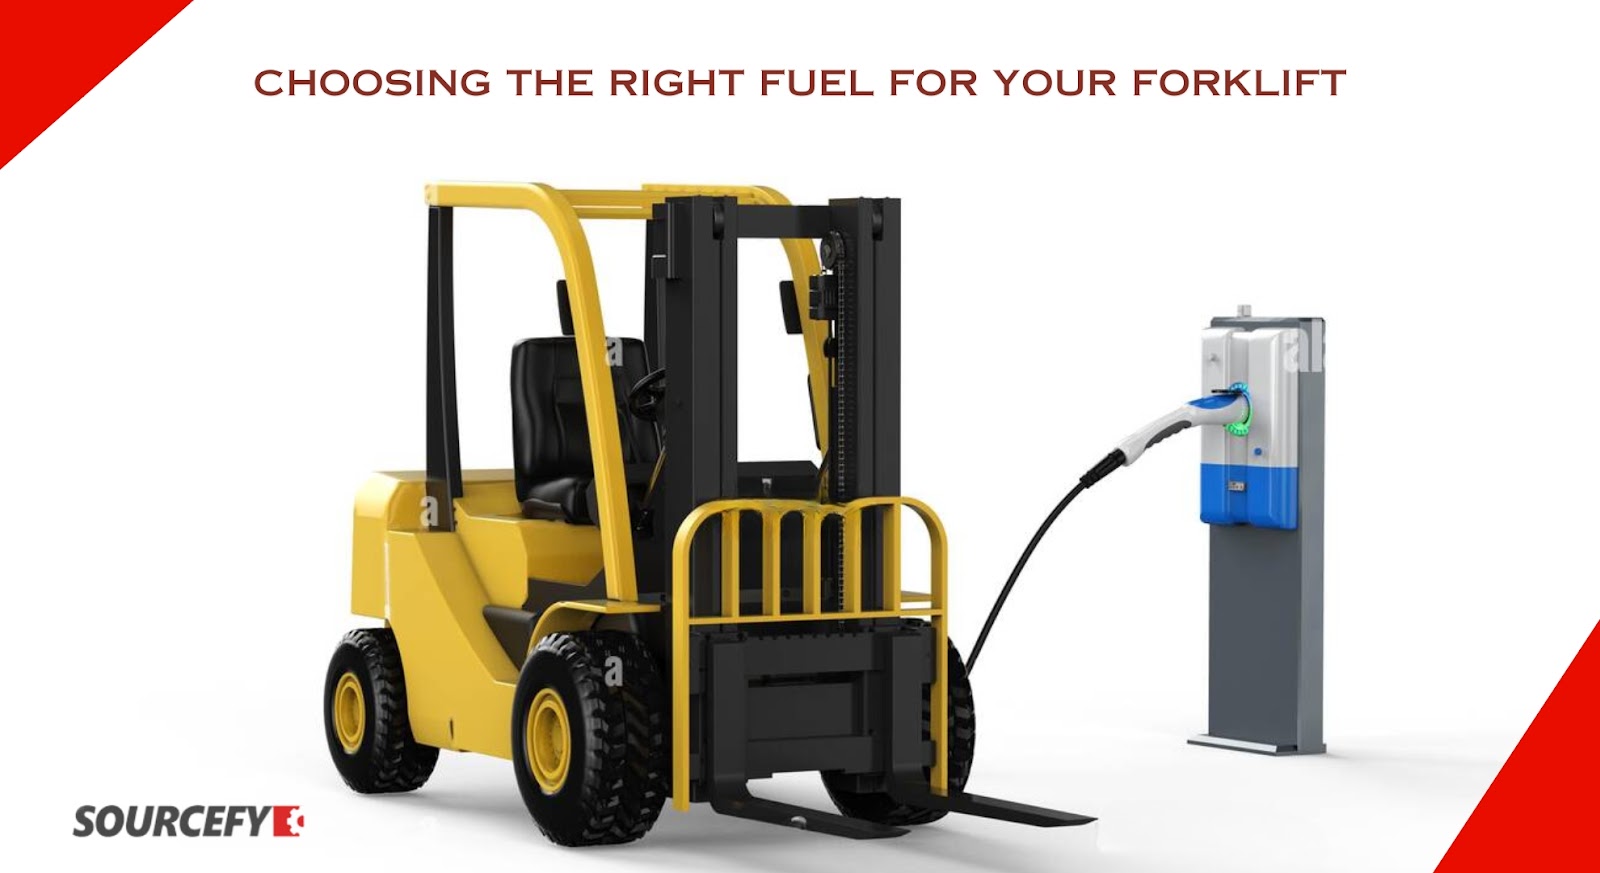 Choosing the Right Fuel for Your Forklift